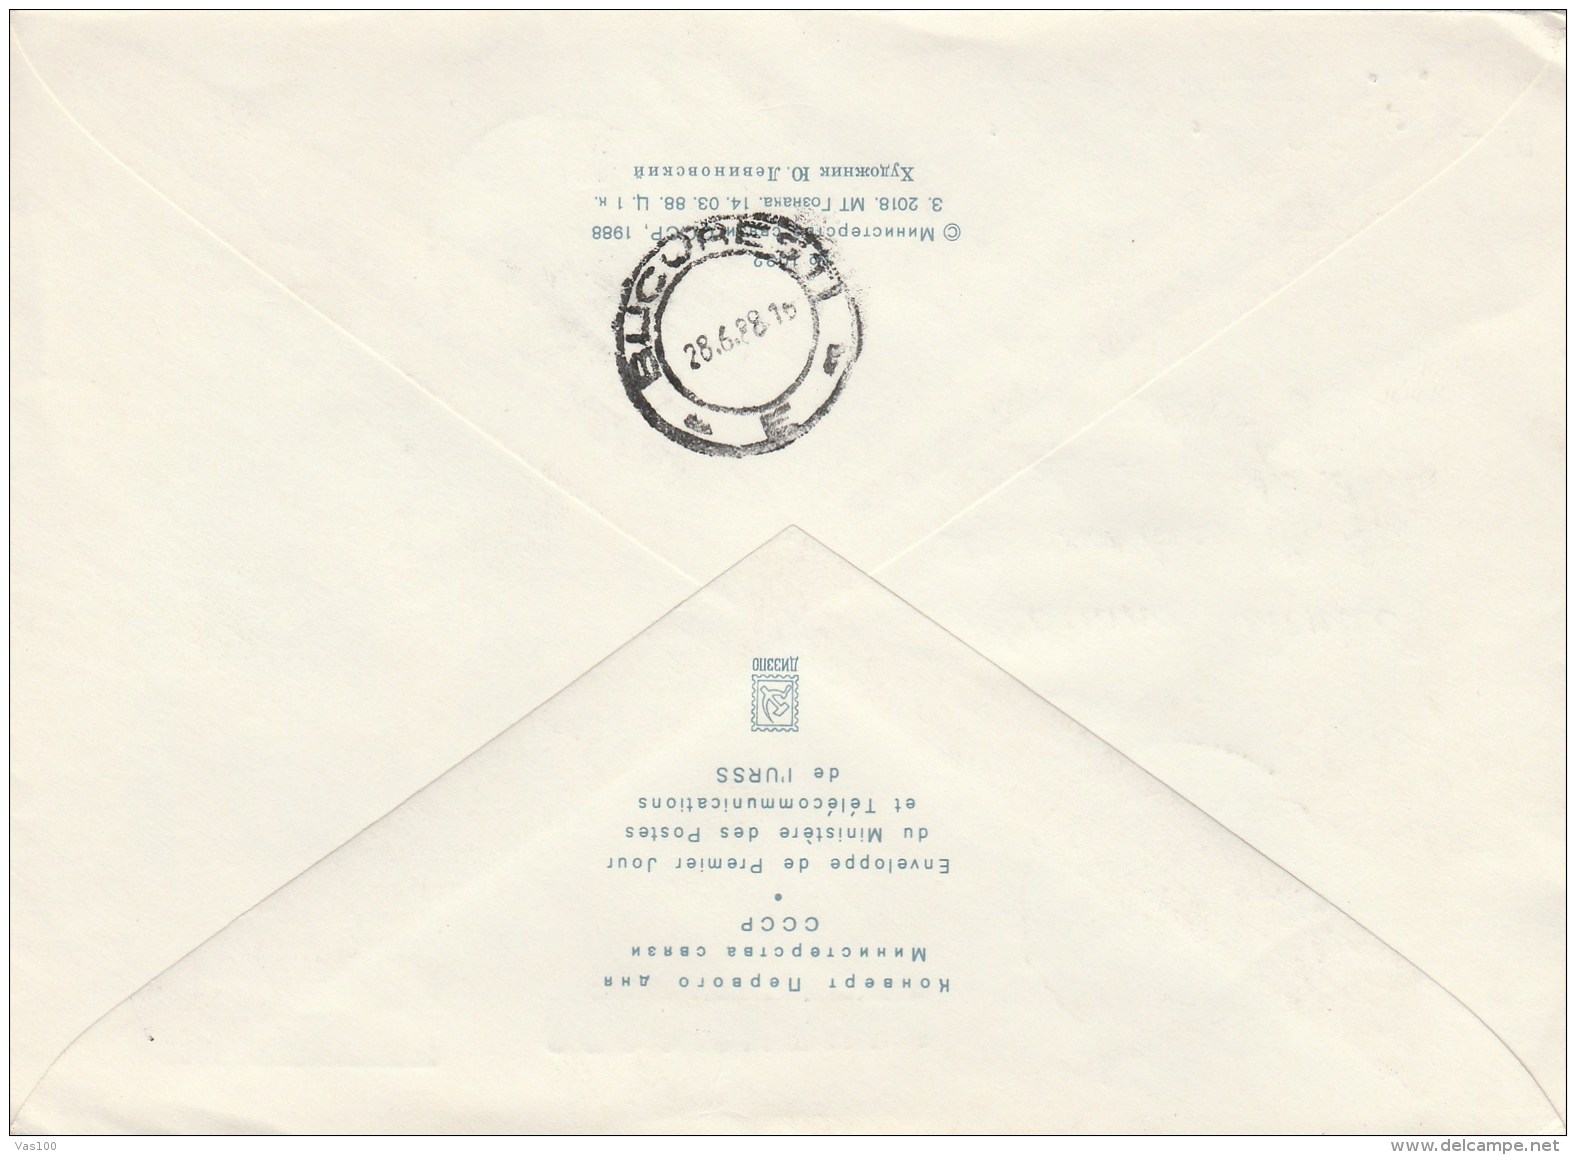 #BV5949 DOVE, PEACE, GLOBE, PLANET, MOSCOW, CCCP, FRIENDSHIP, REGISTERED, COVER FDC ,1988, RUSSIA. - FDC